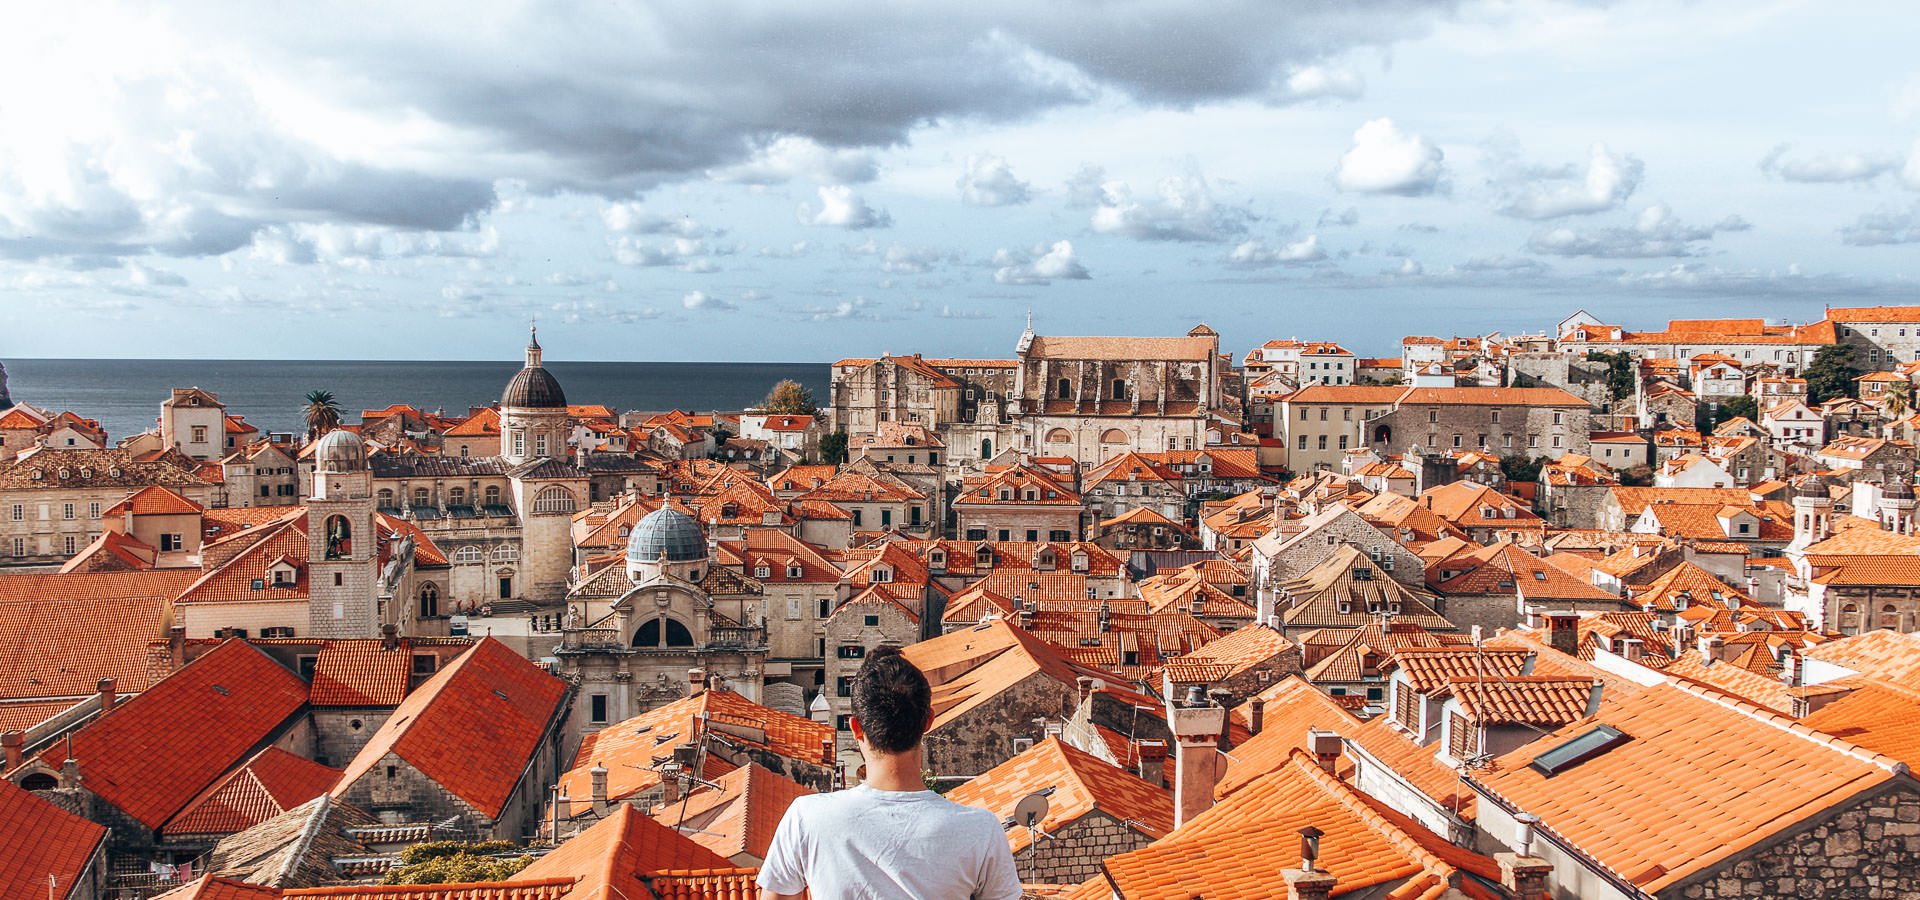 How To Spend 48 Hours In Dubrovnik | brunch in london 3